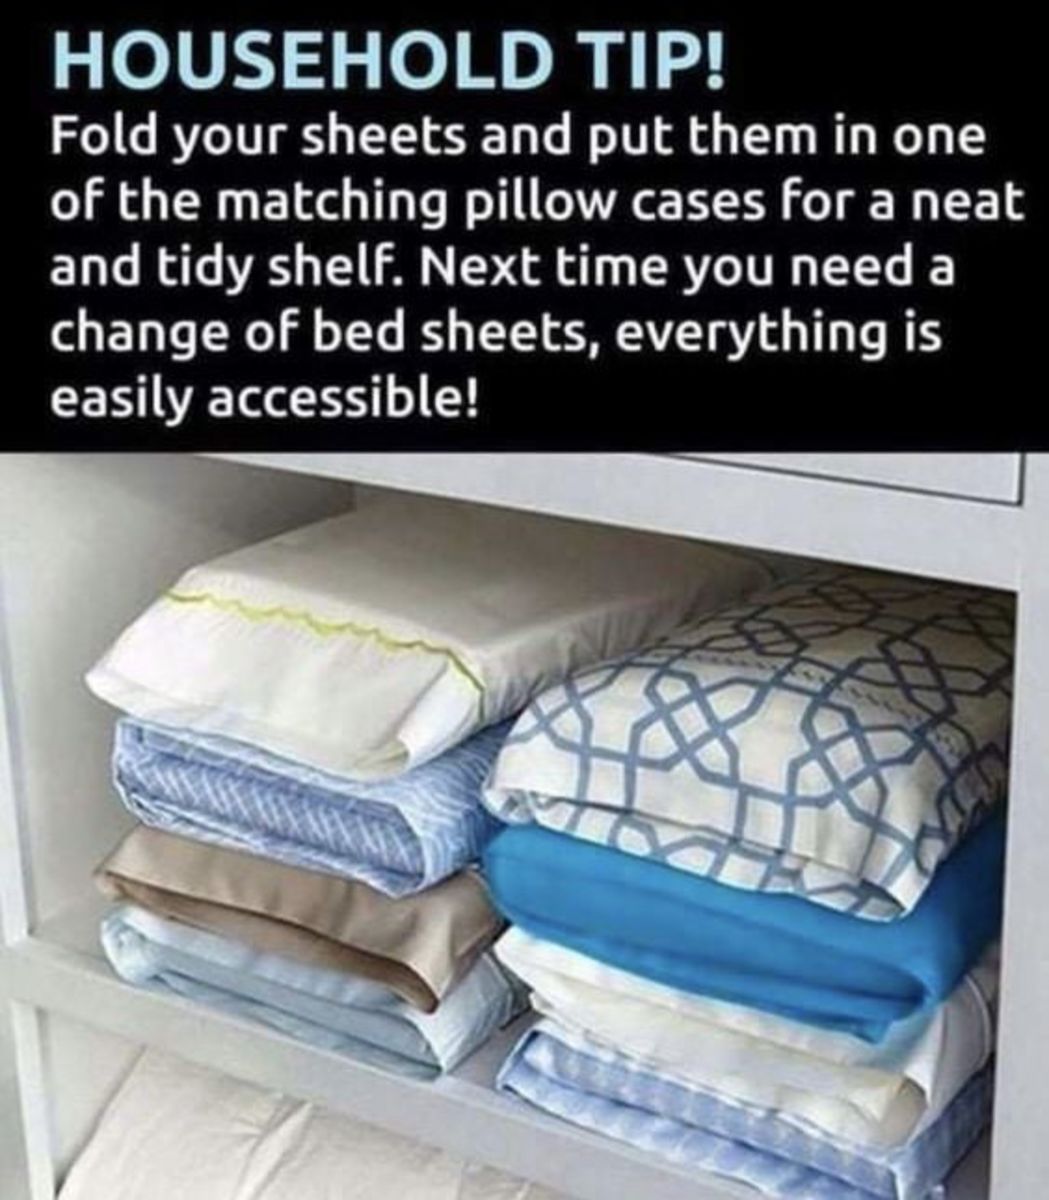 https://images.saymedia-content.com/.image/t_share/MjAzMDYxMDAxNzk5NjA3ODc1/easy-storage-ideas-for-small-spaces.jpg